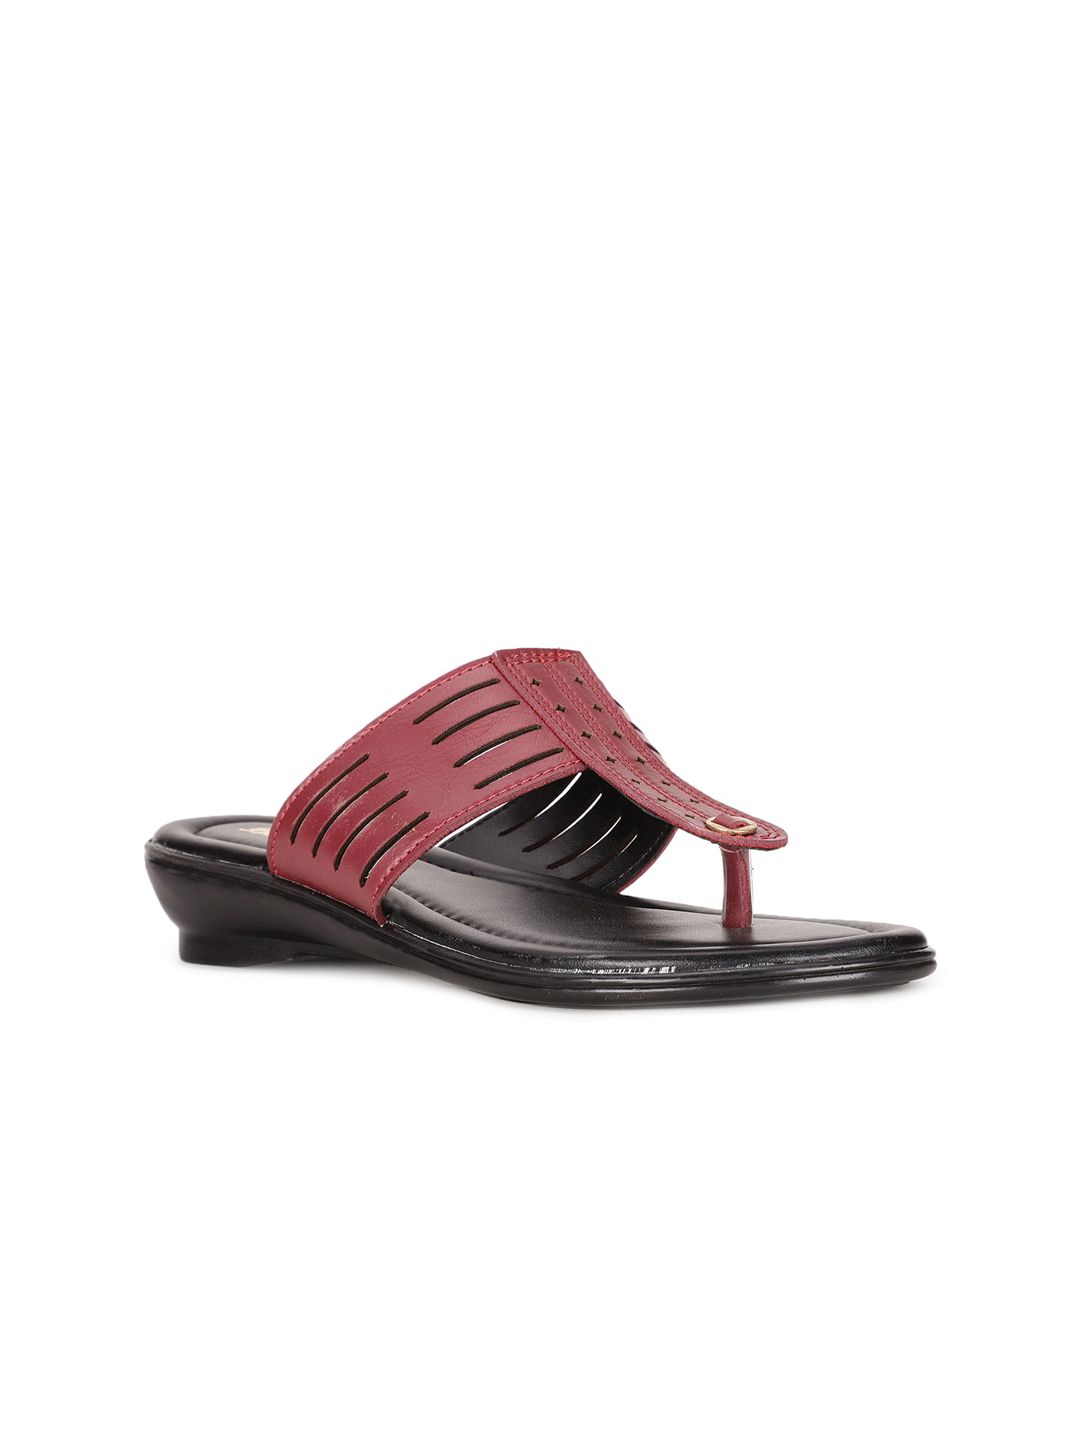 Bata Women Maroon Striped T-Strap Flats with Laser Cuts Price in India